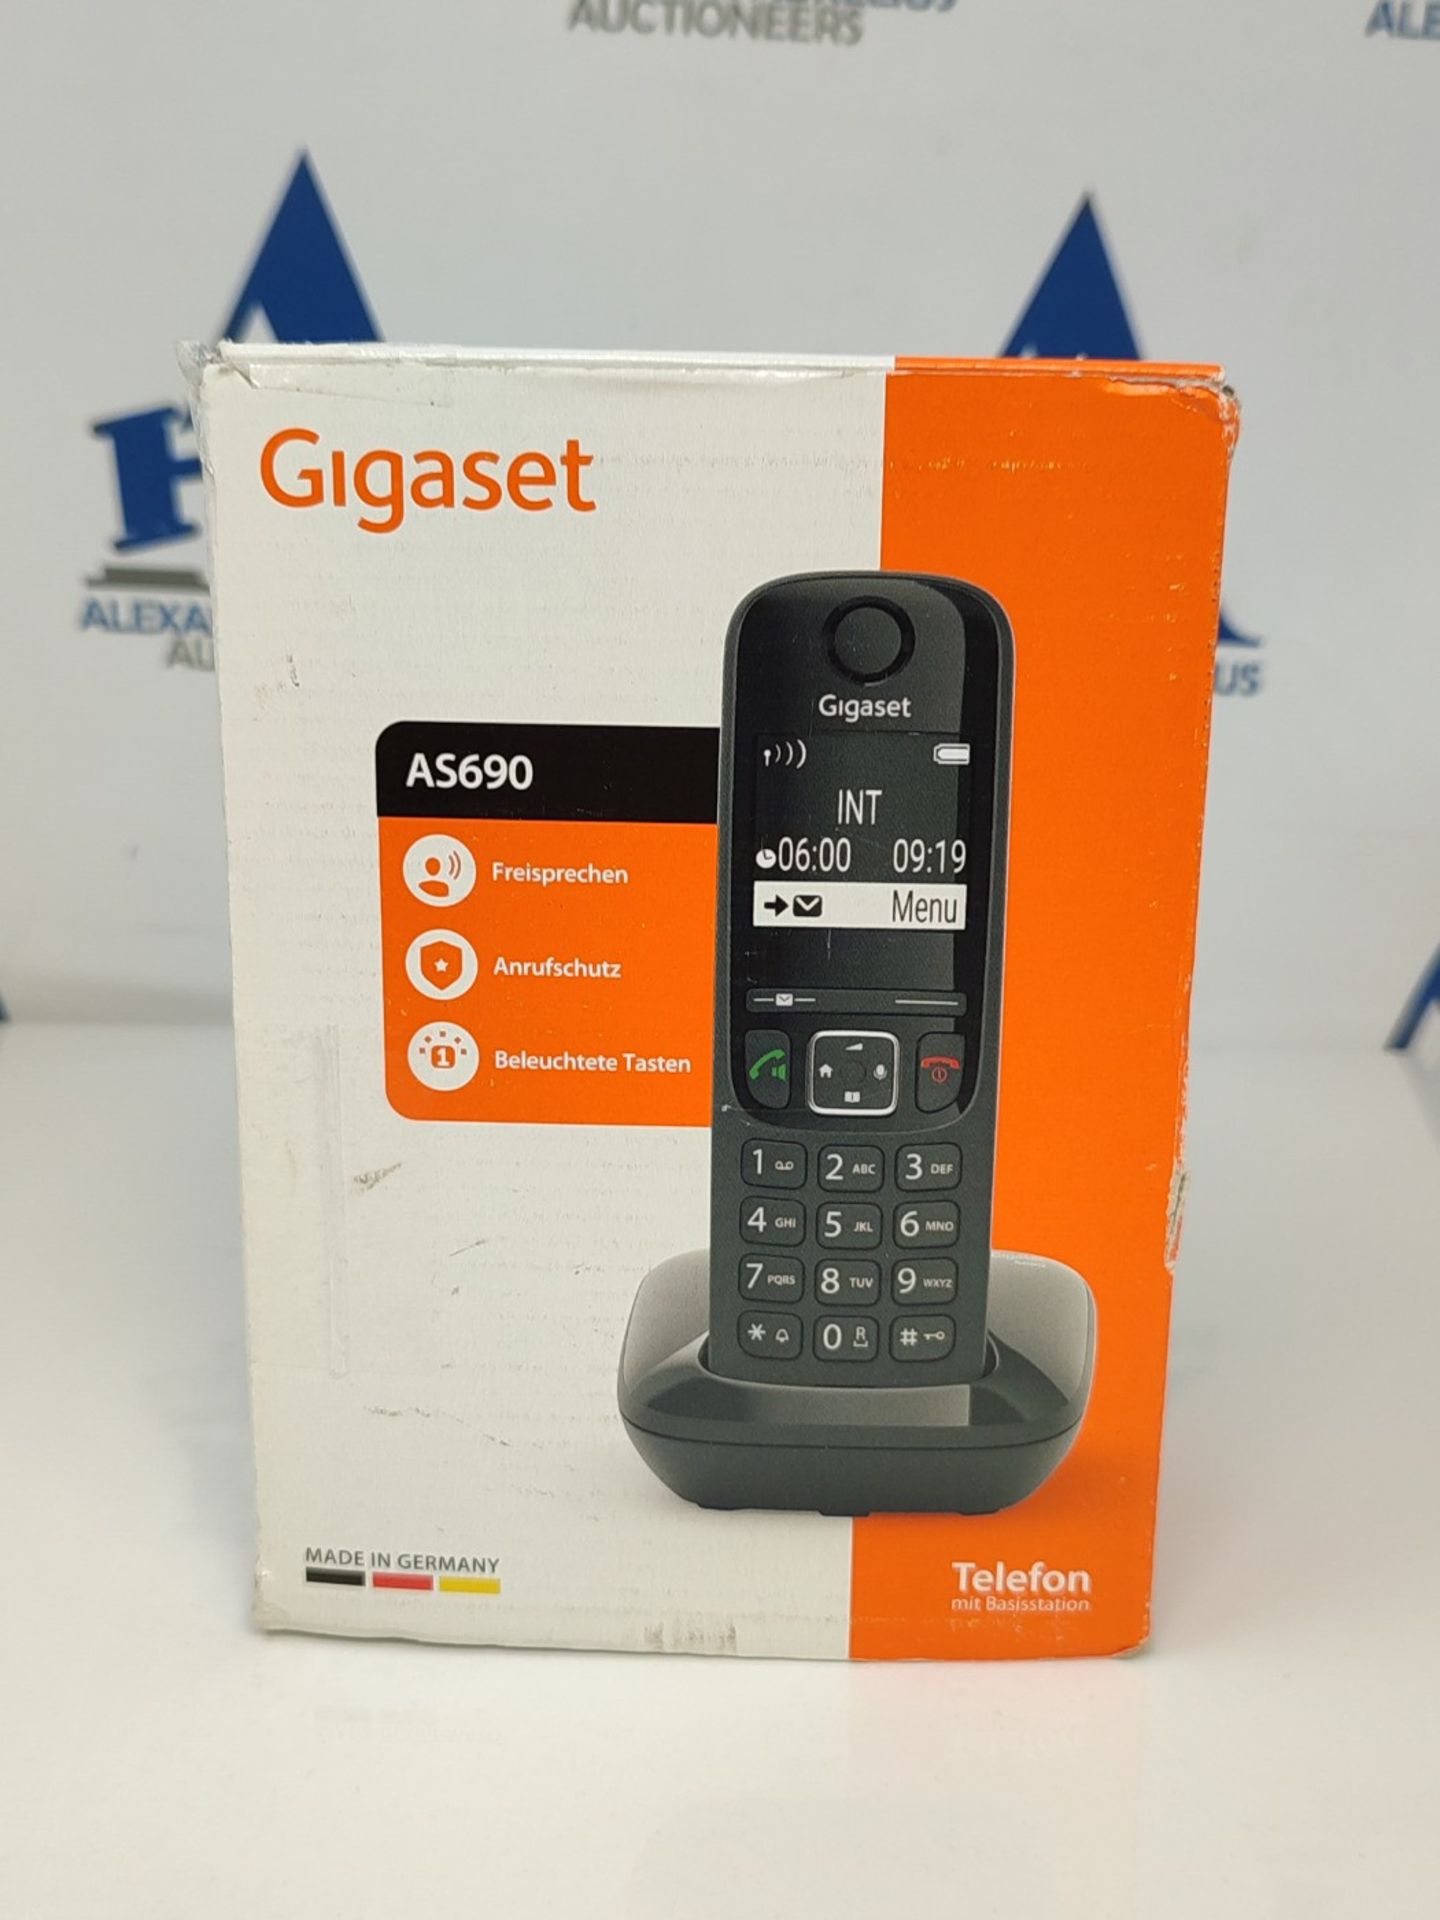 Gigaset AS690 - Cordless DECT Telephone - large, high-contrast display - brilliant aud - Image 2 of 6